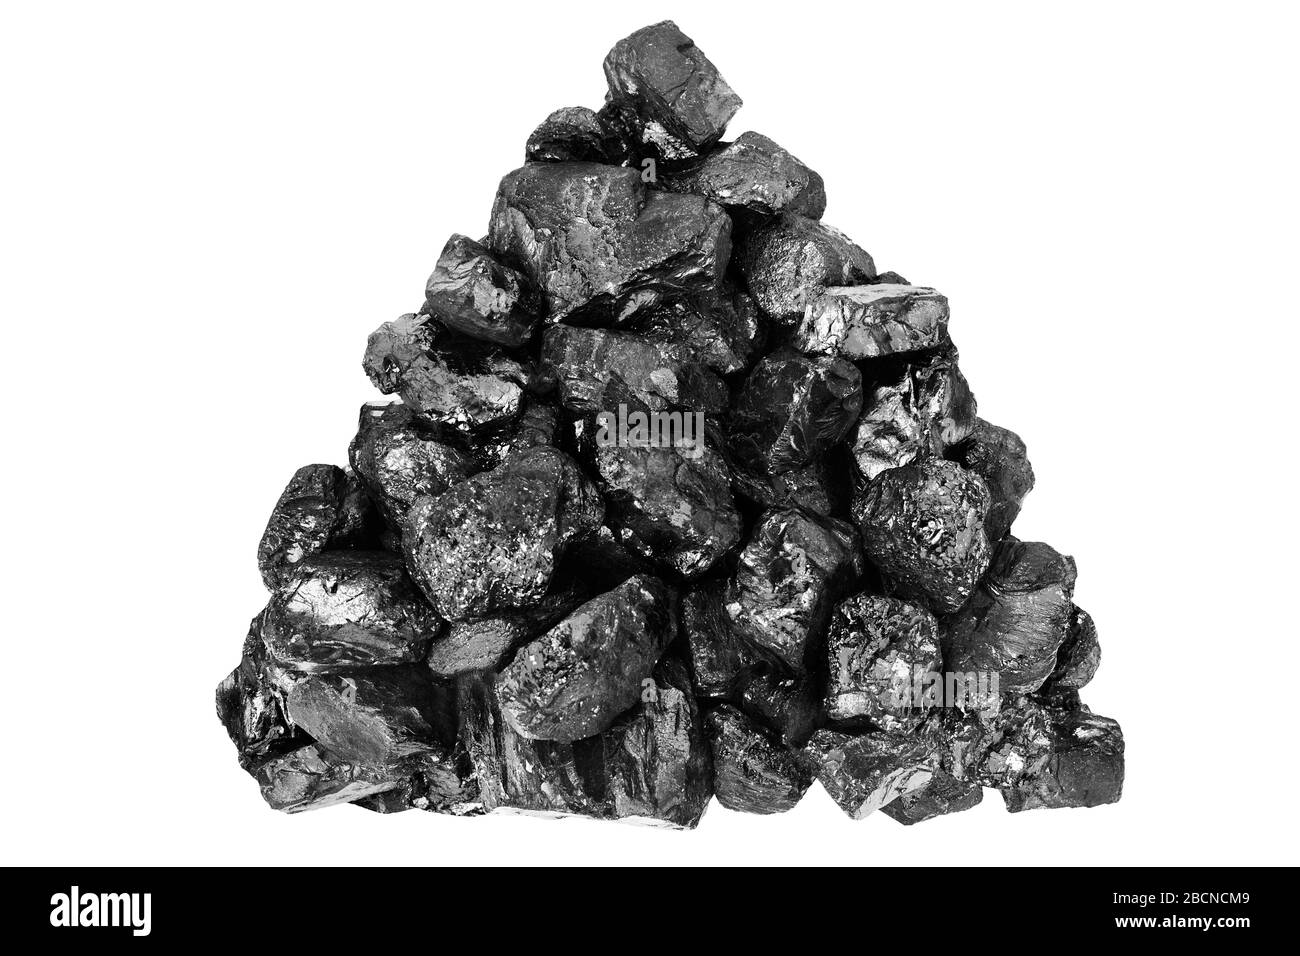 Lignite Mineral coal stock image. Image of energy, charcoal - 92866191